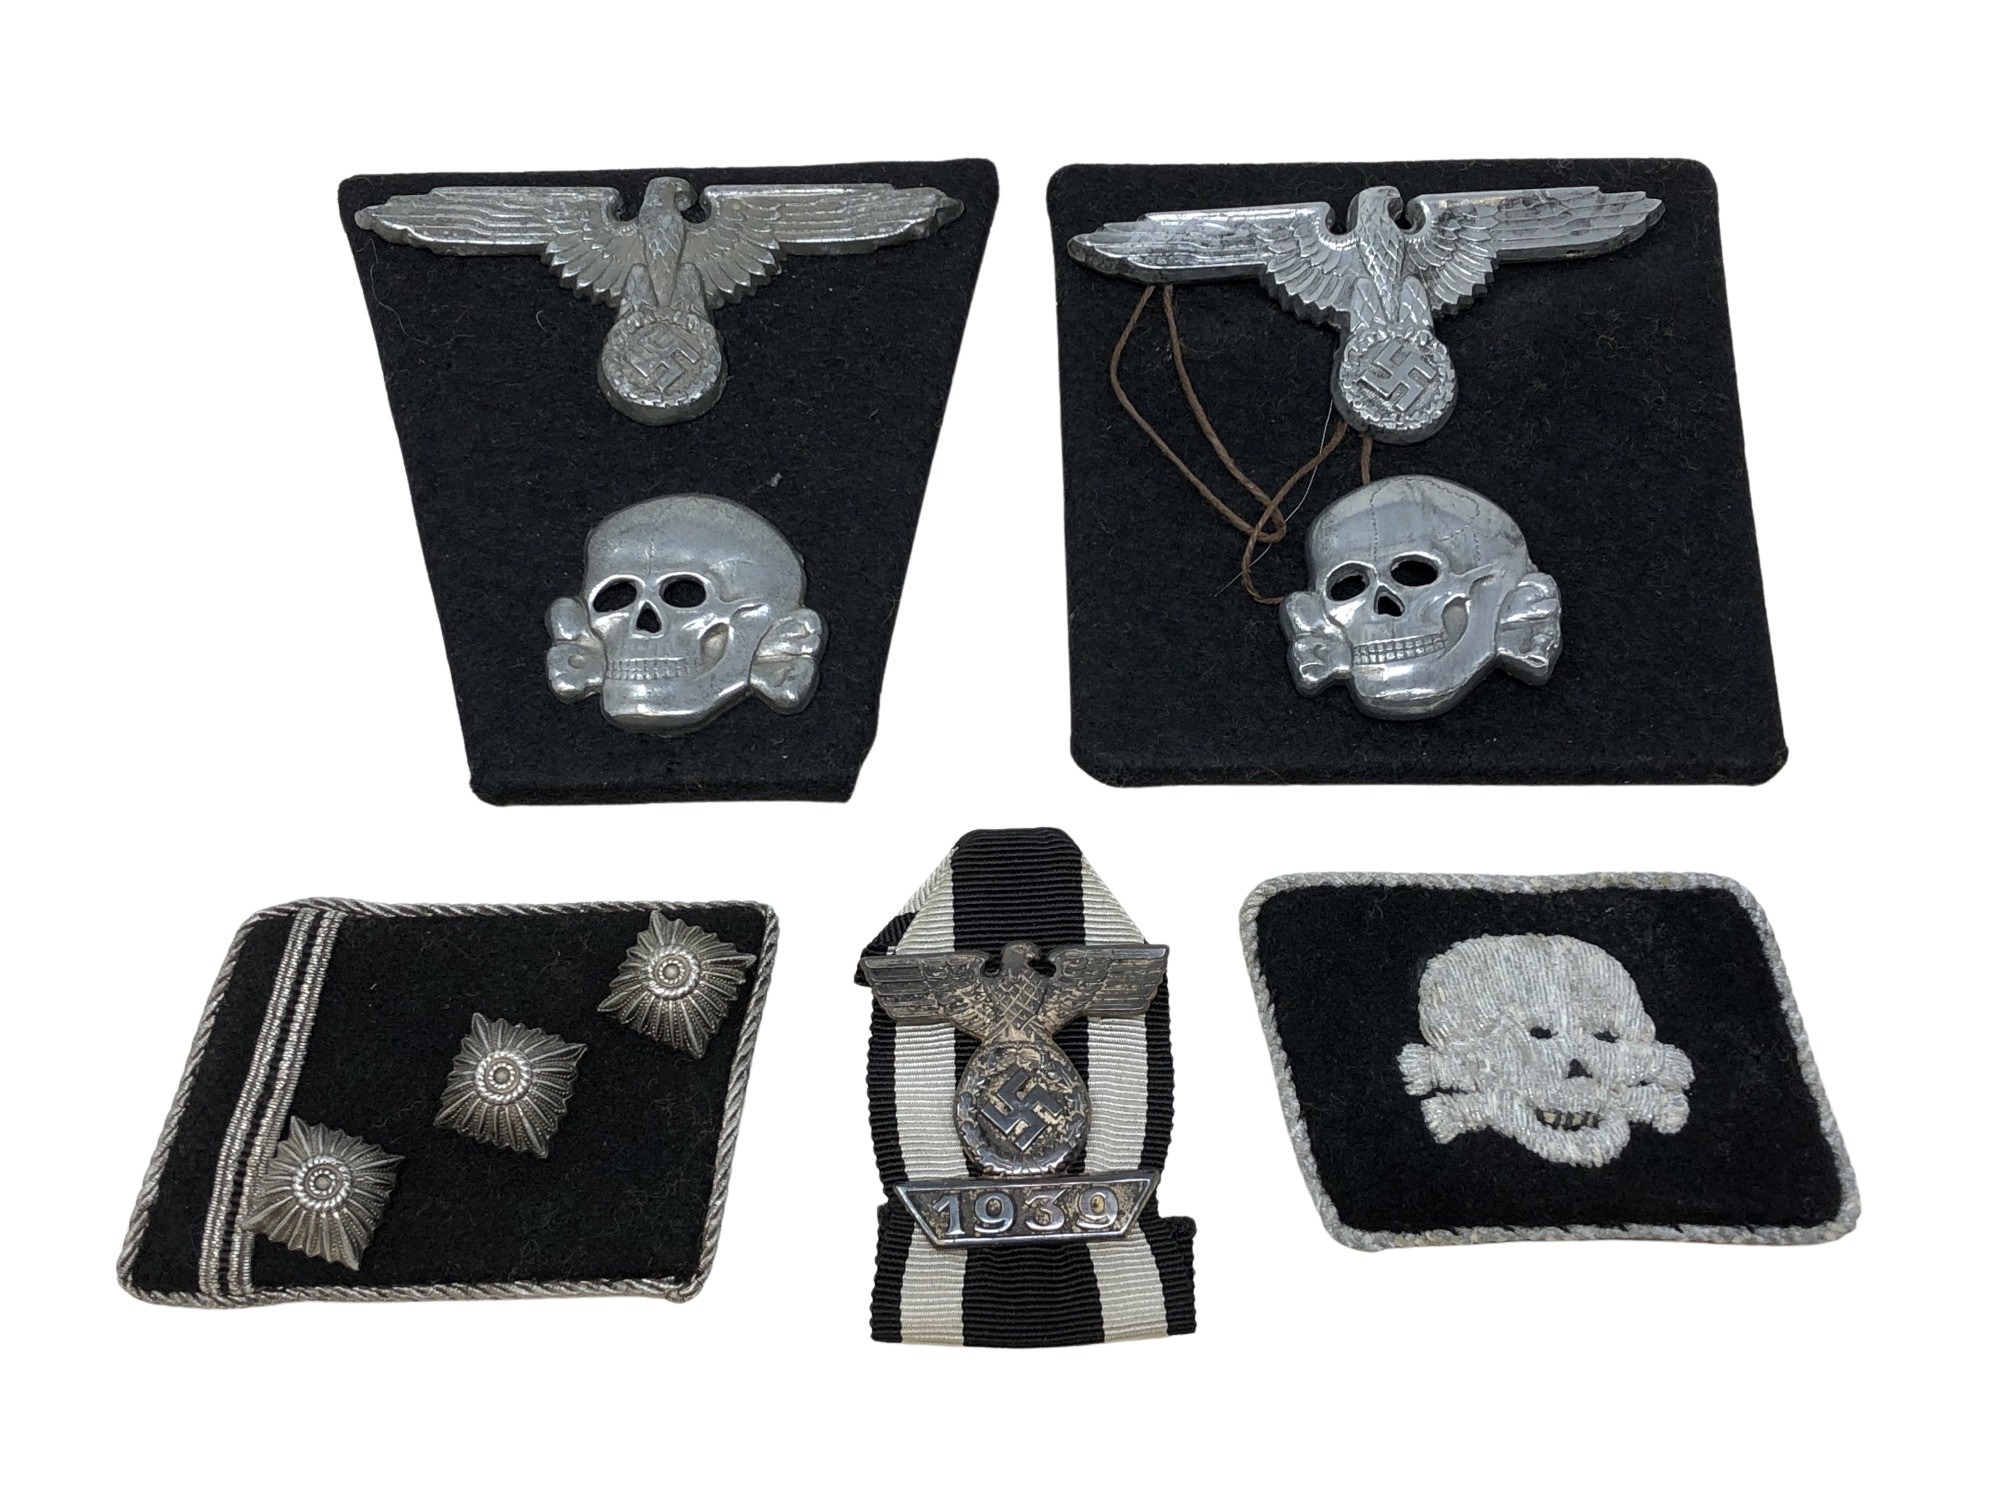 A group of German insignia including two Totenkopf skull cap badges, two eagle cap badges,